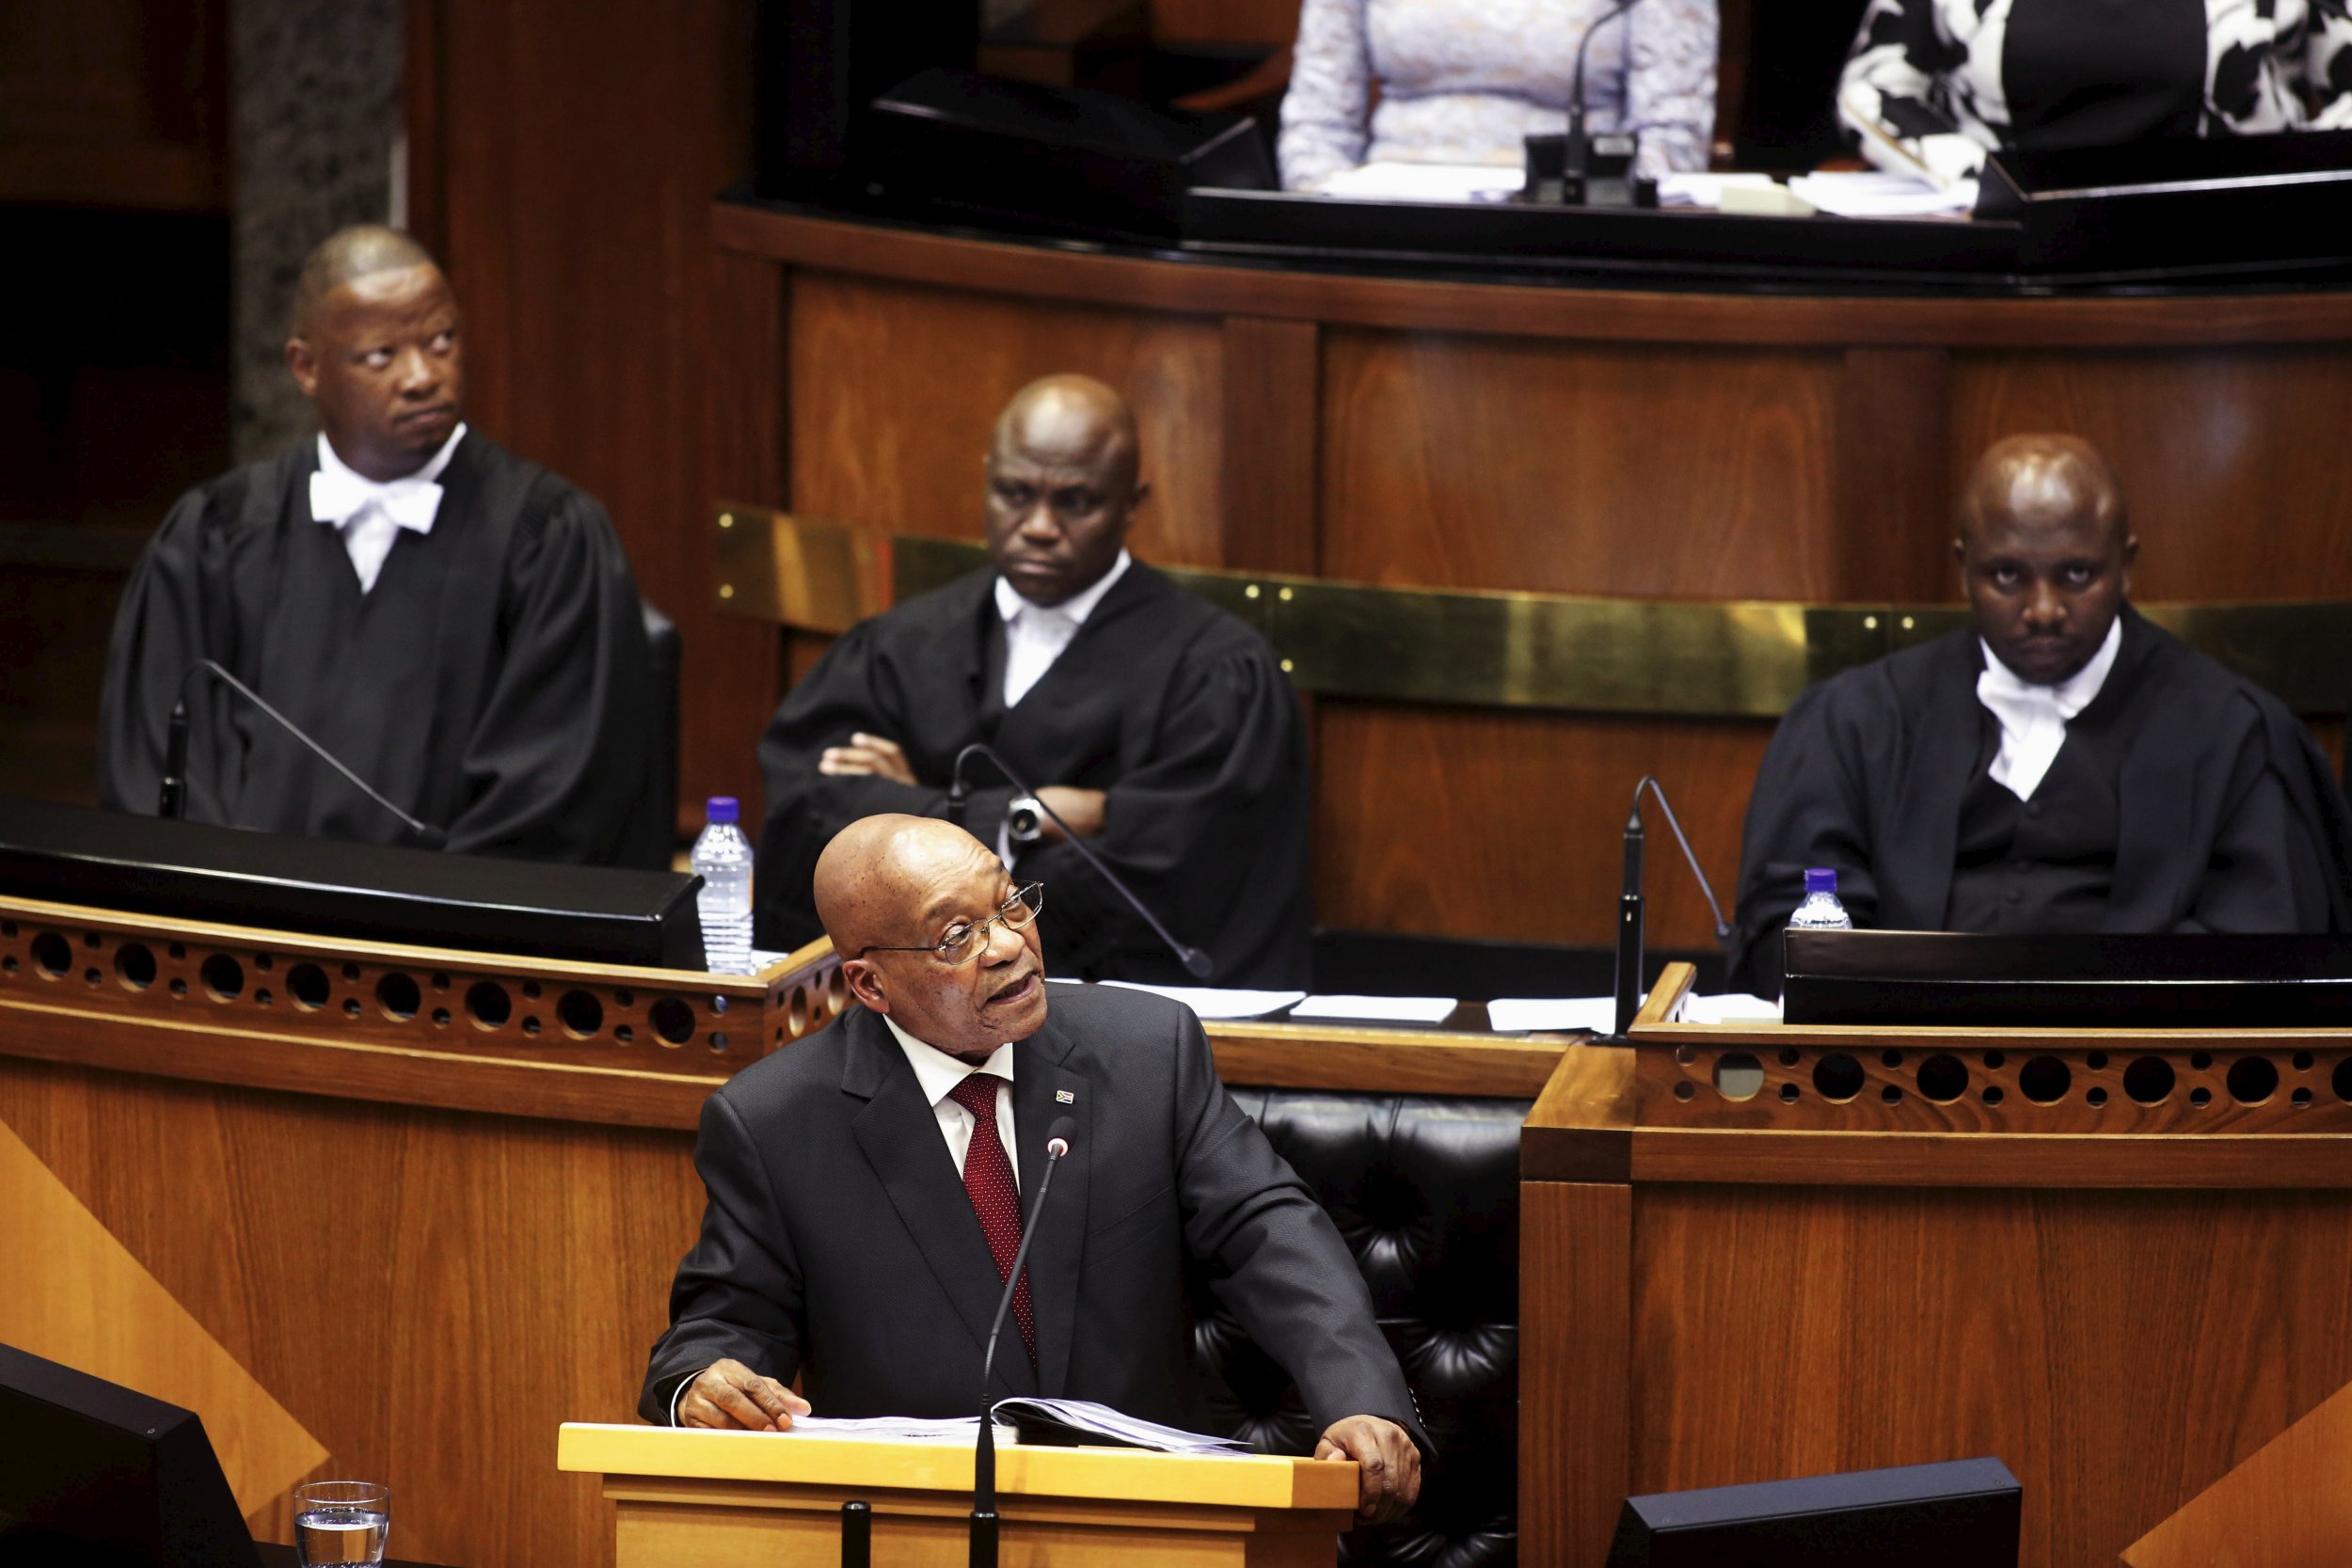 Jacob Zuma opens the South African Parliament.